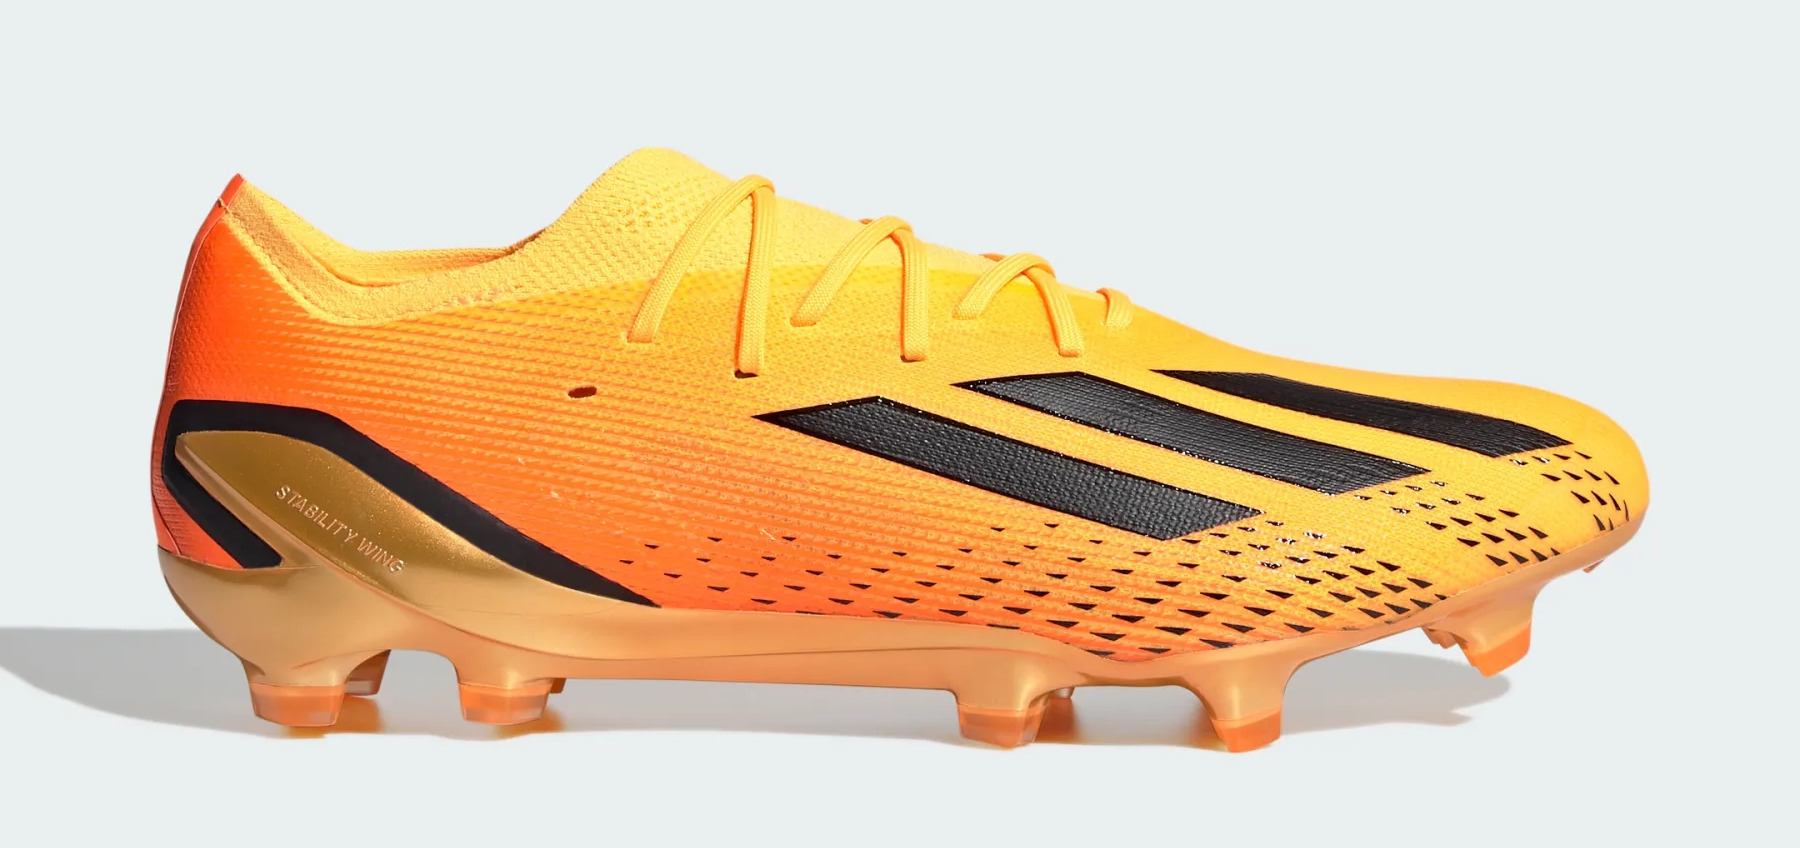 Vader fage Glimmend Kwijting Lionel Messi Football Boots